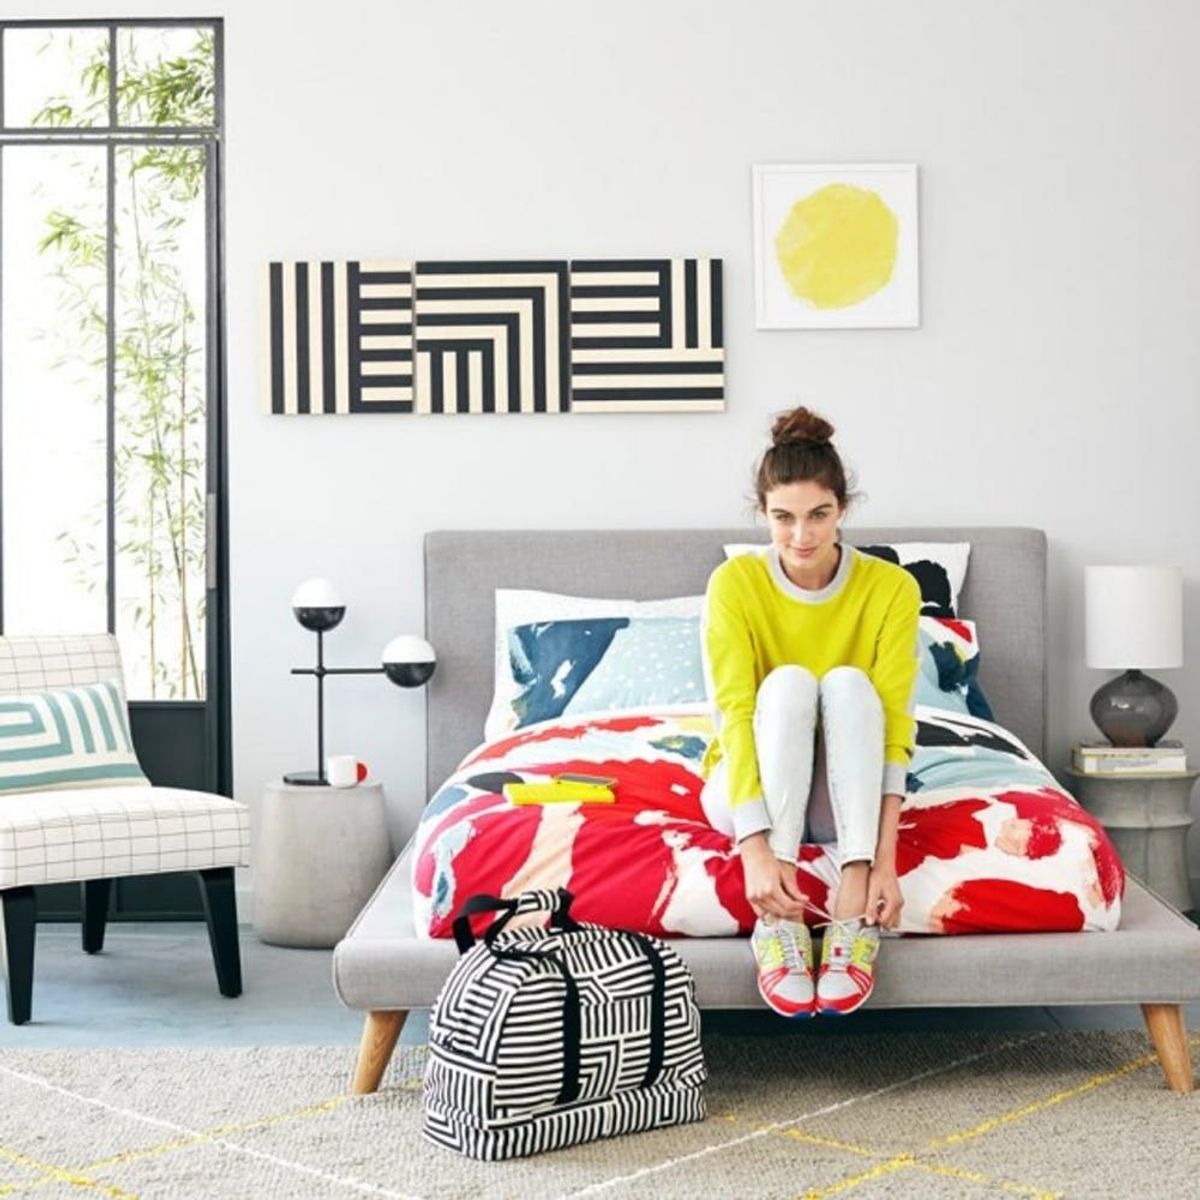 Kate Spade Saturday’s New Decor Line Gives 24/7 Weekend Vibes